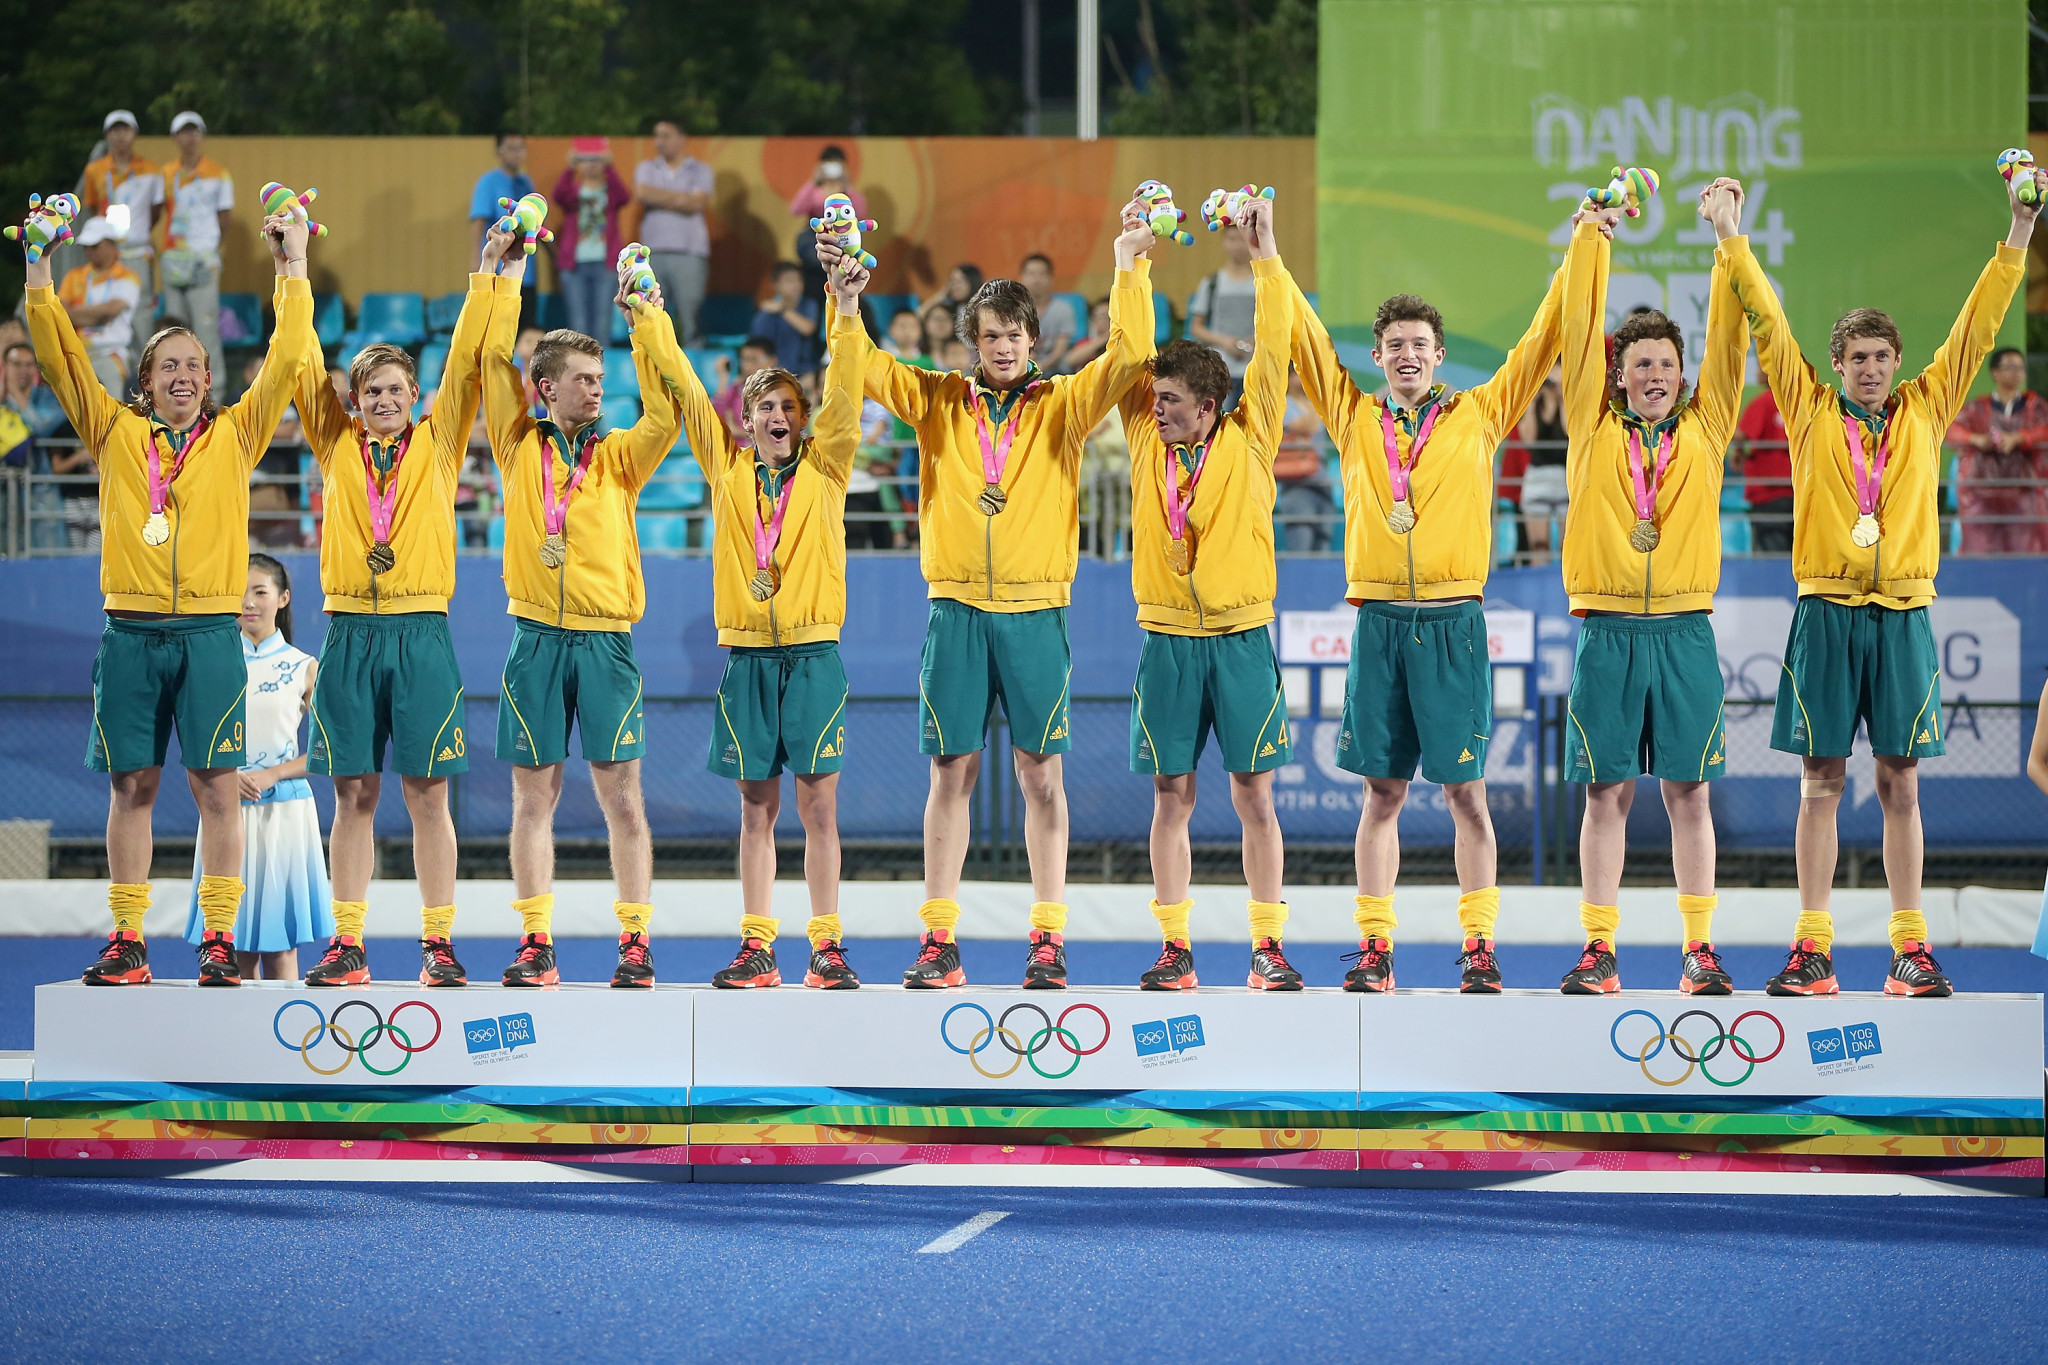 Australia won the Hockey5s boys' gold-medal match at the Nanjing 2014 Summer Youth Olympic Games, with hosts China winning the girls' event ©Getty Images 